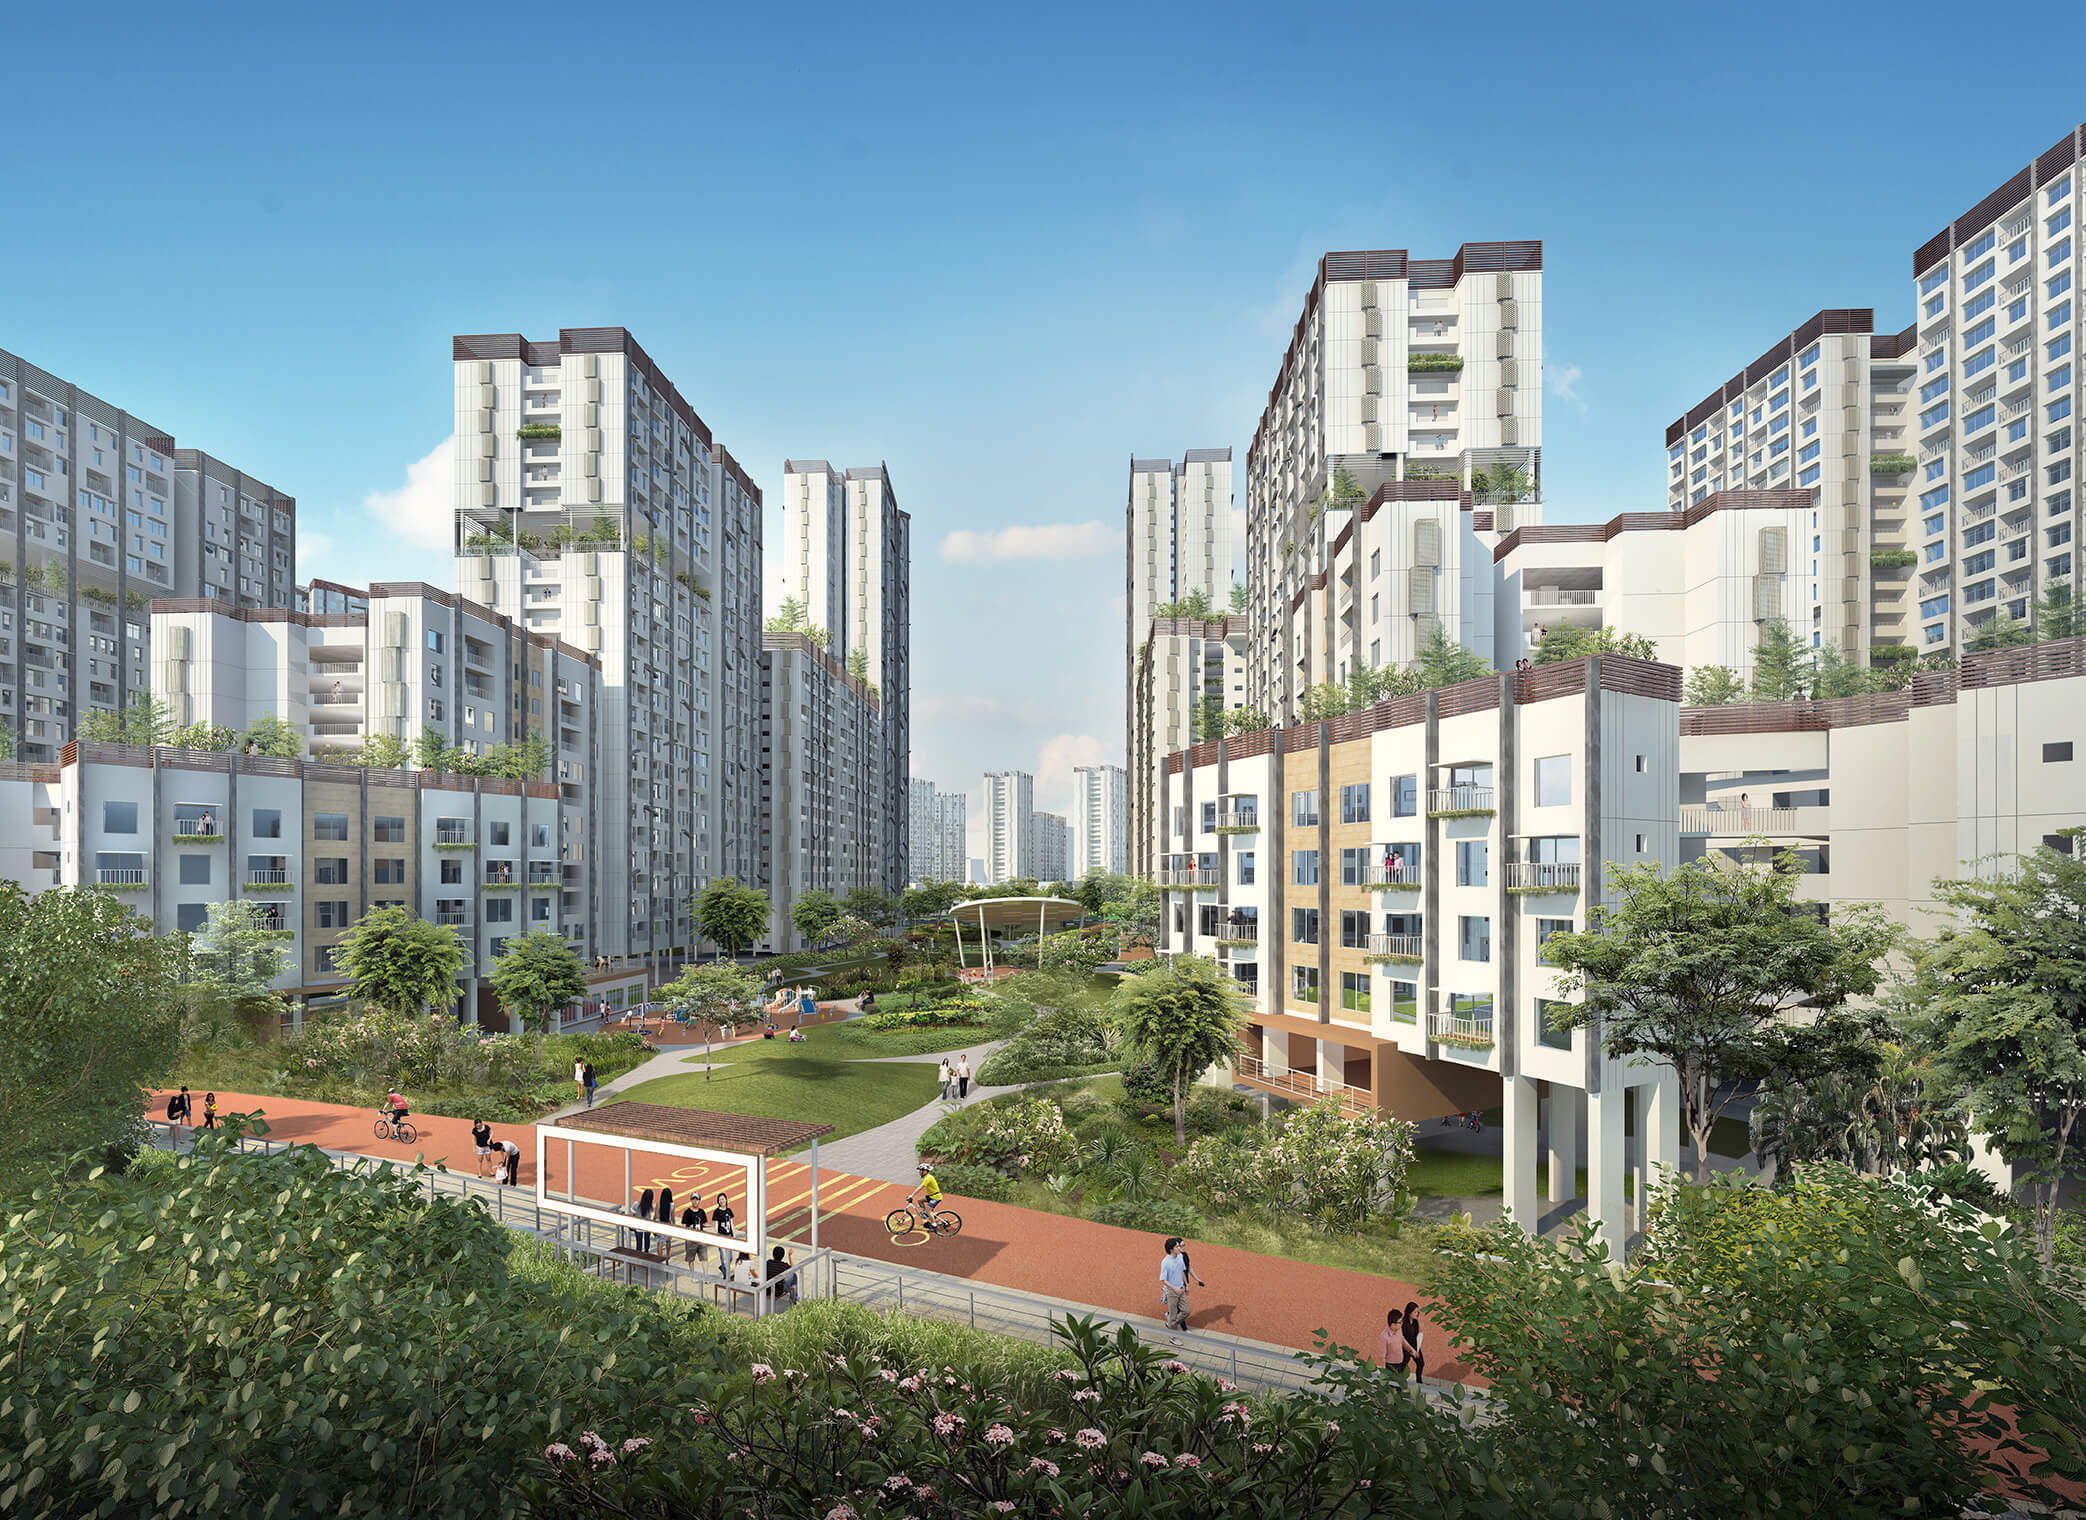 Artist's impression of a residential estate at Woodlands North Coast